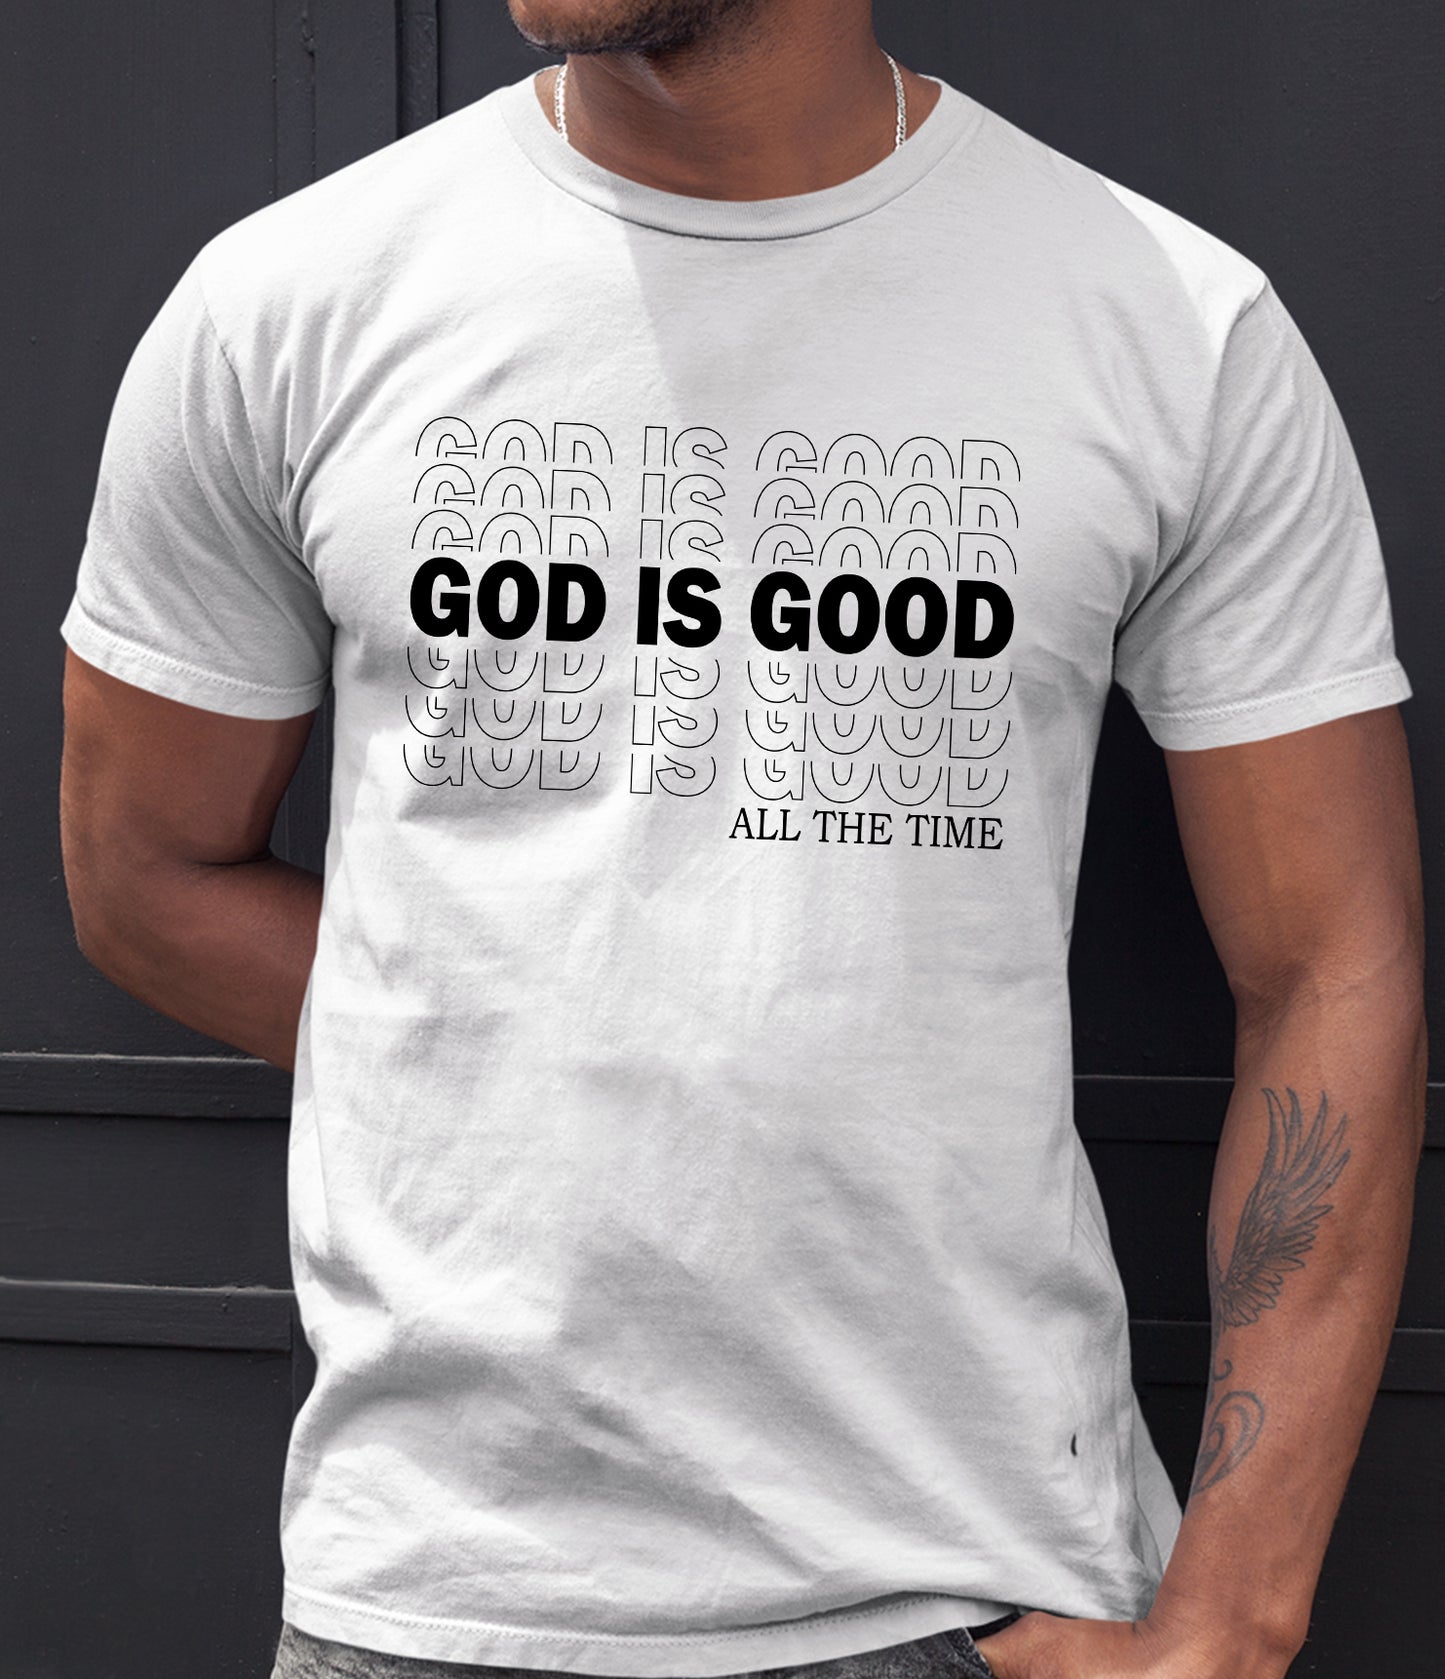 God is Good Shirt All time, T-Shirt For Women, T-Shirt For Men, T-Shirt For Christians, Bible Tees